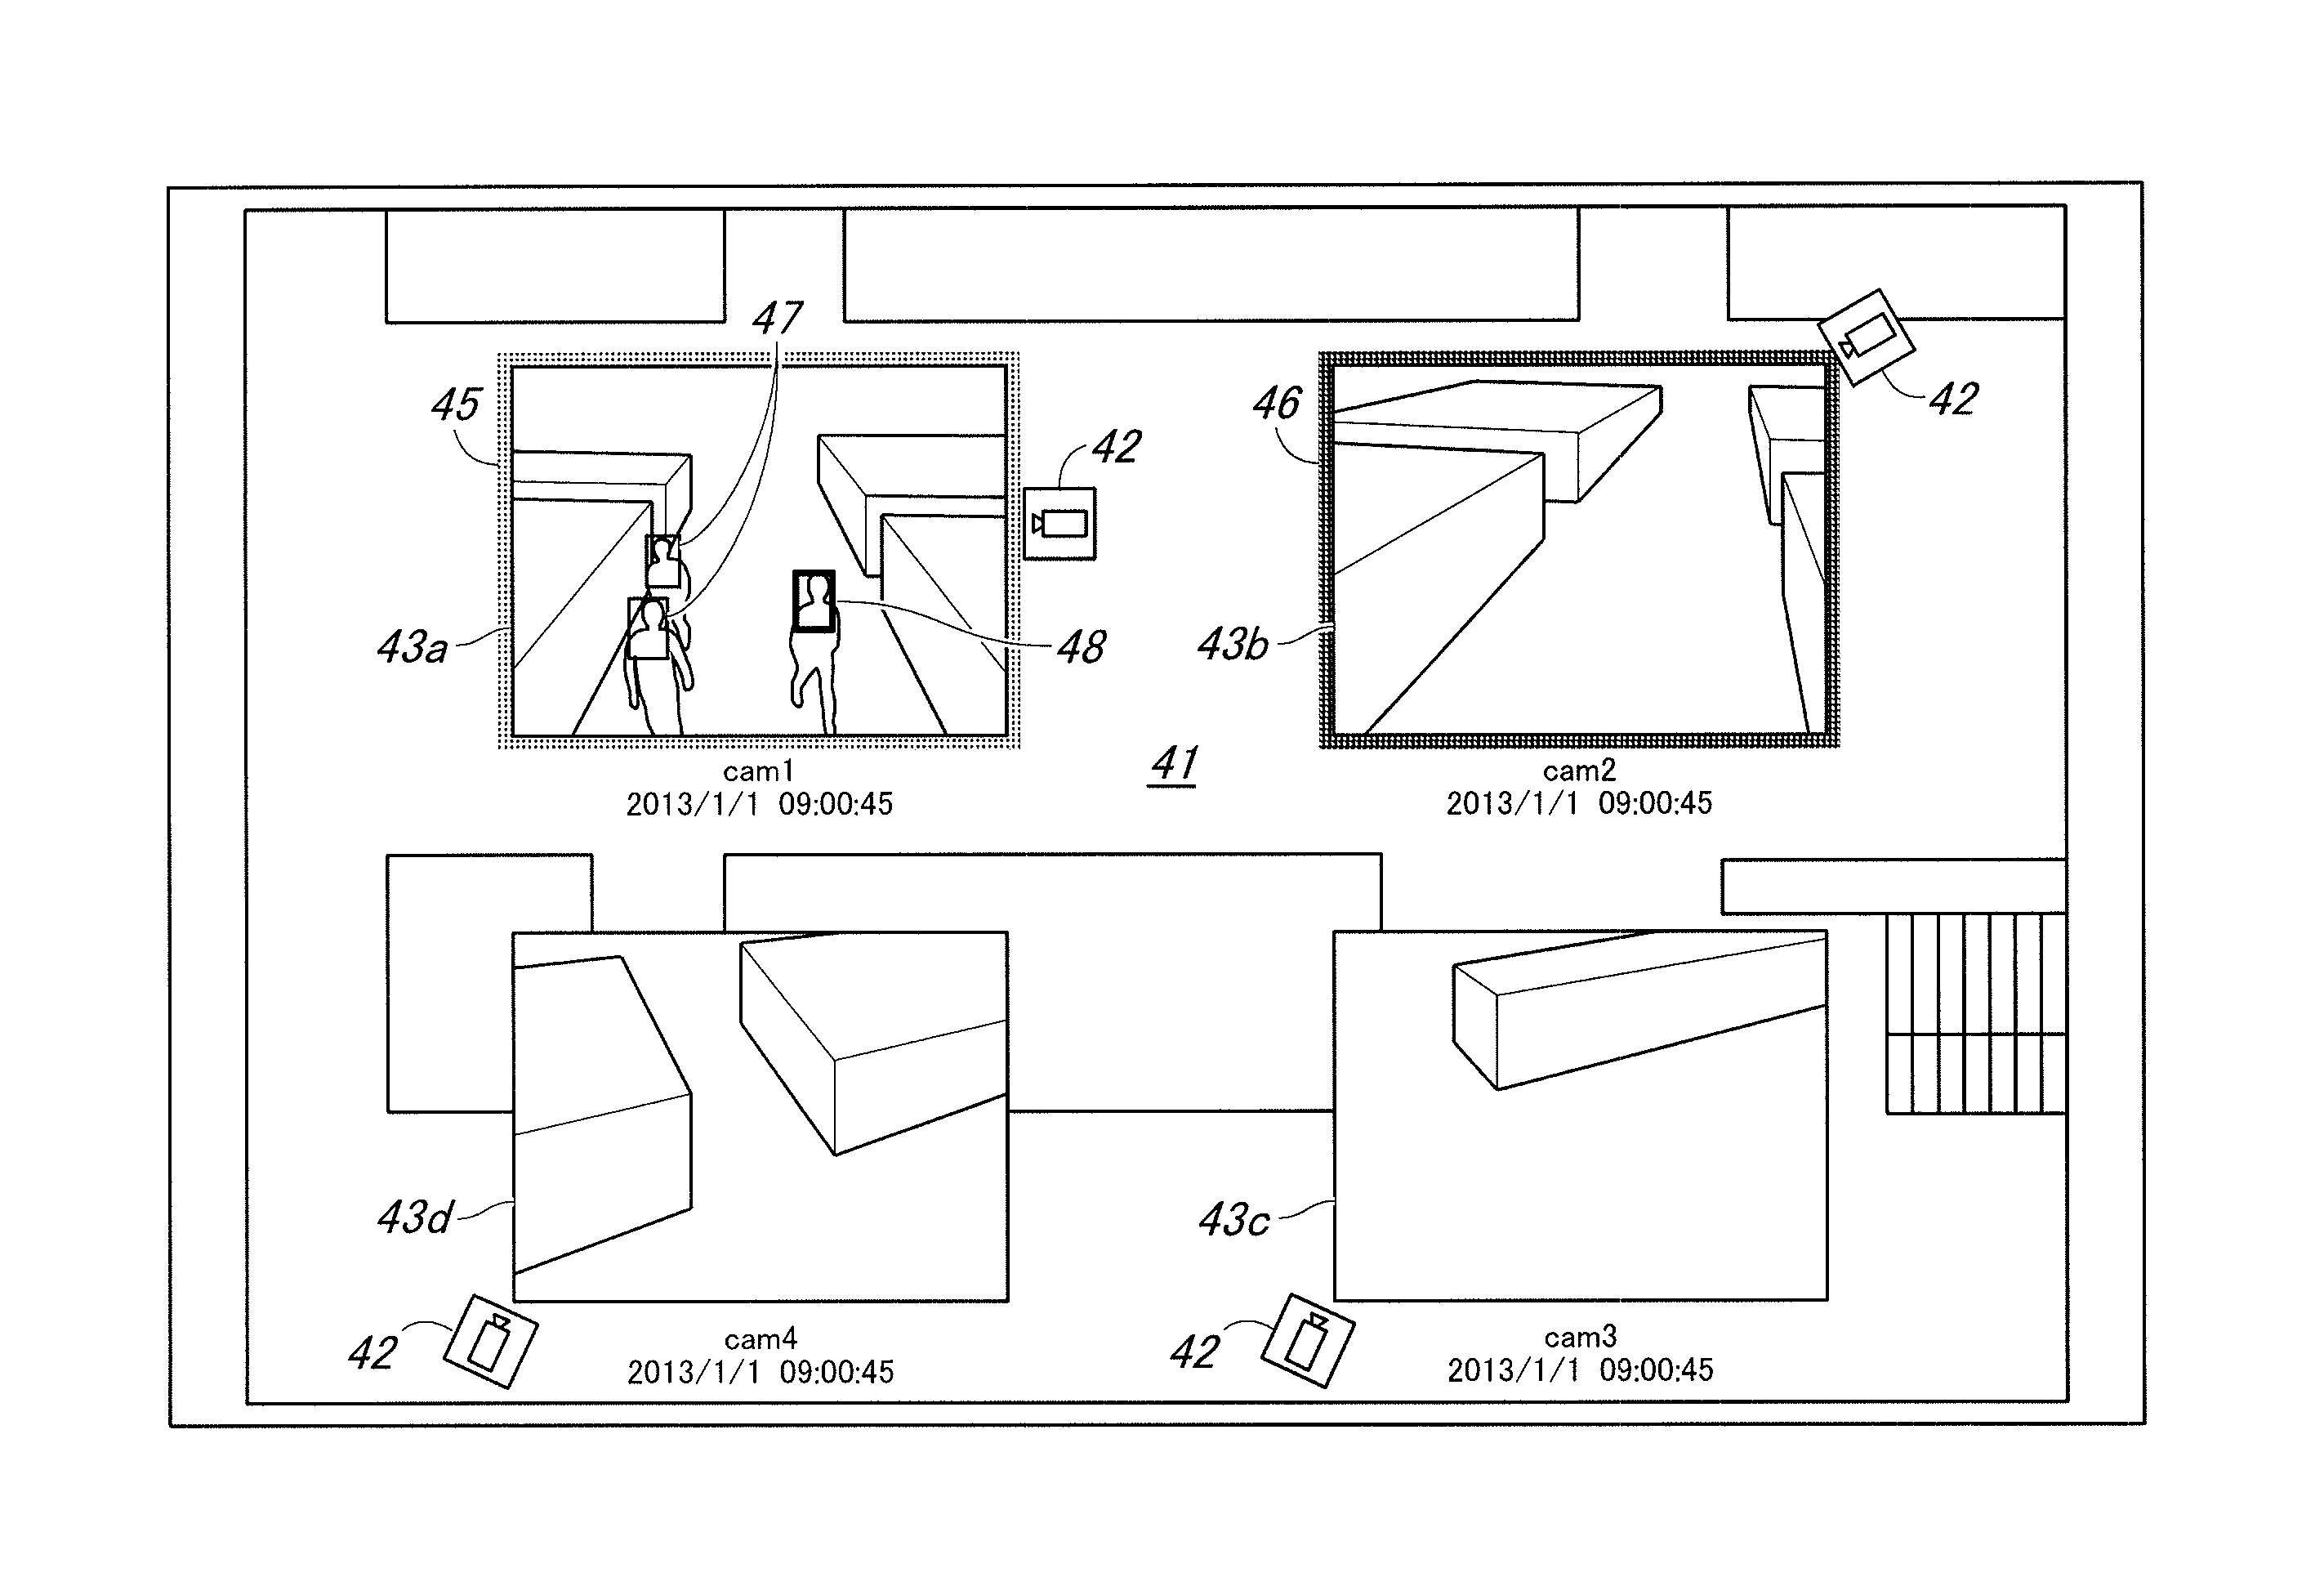 Tracking assistance device, tracking assistance system and tracking assistance method